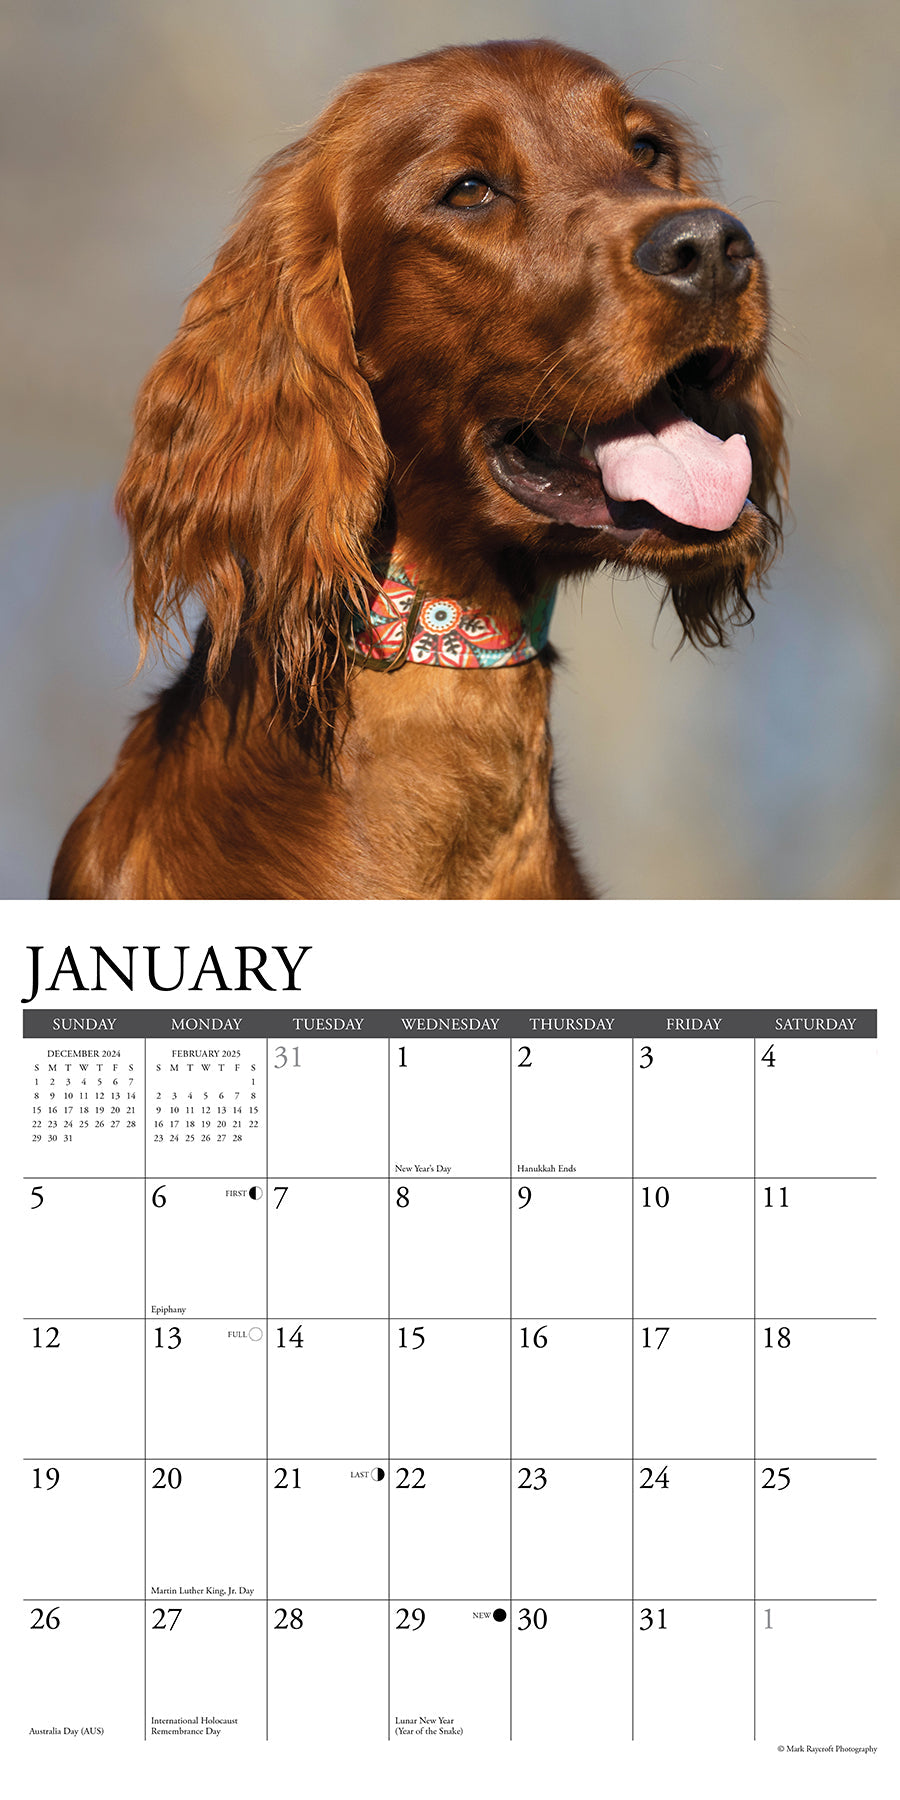 2025 Irish Setters - Square Wall Calendar (US Only)